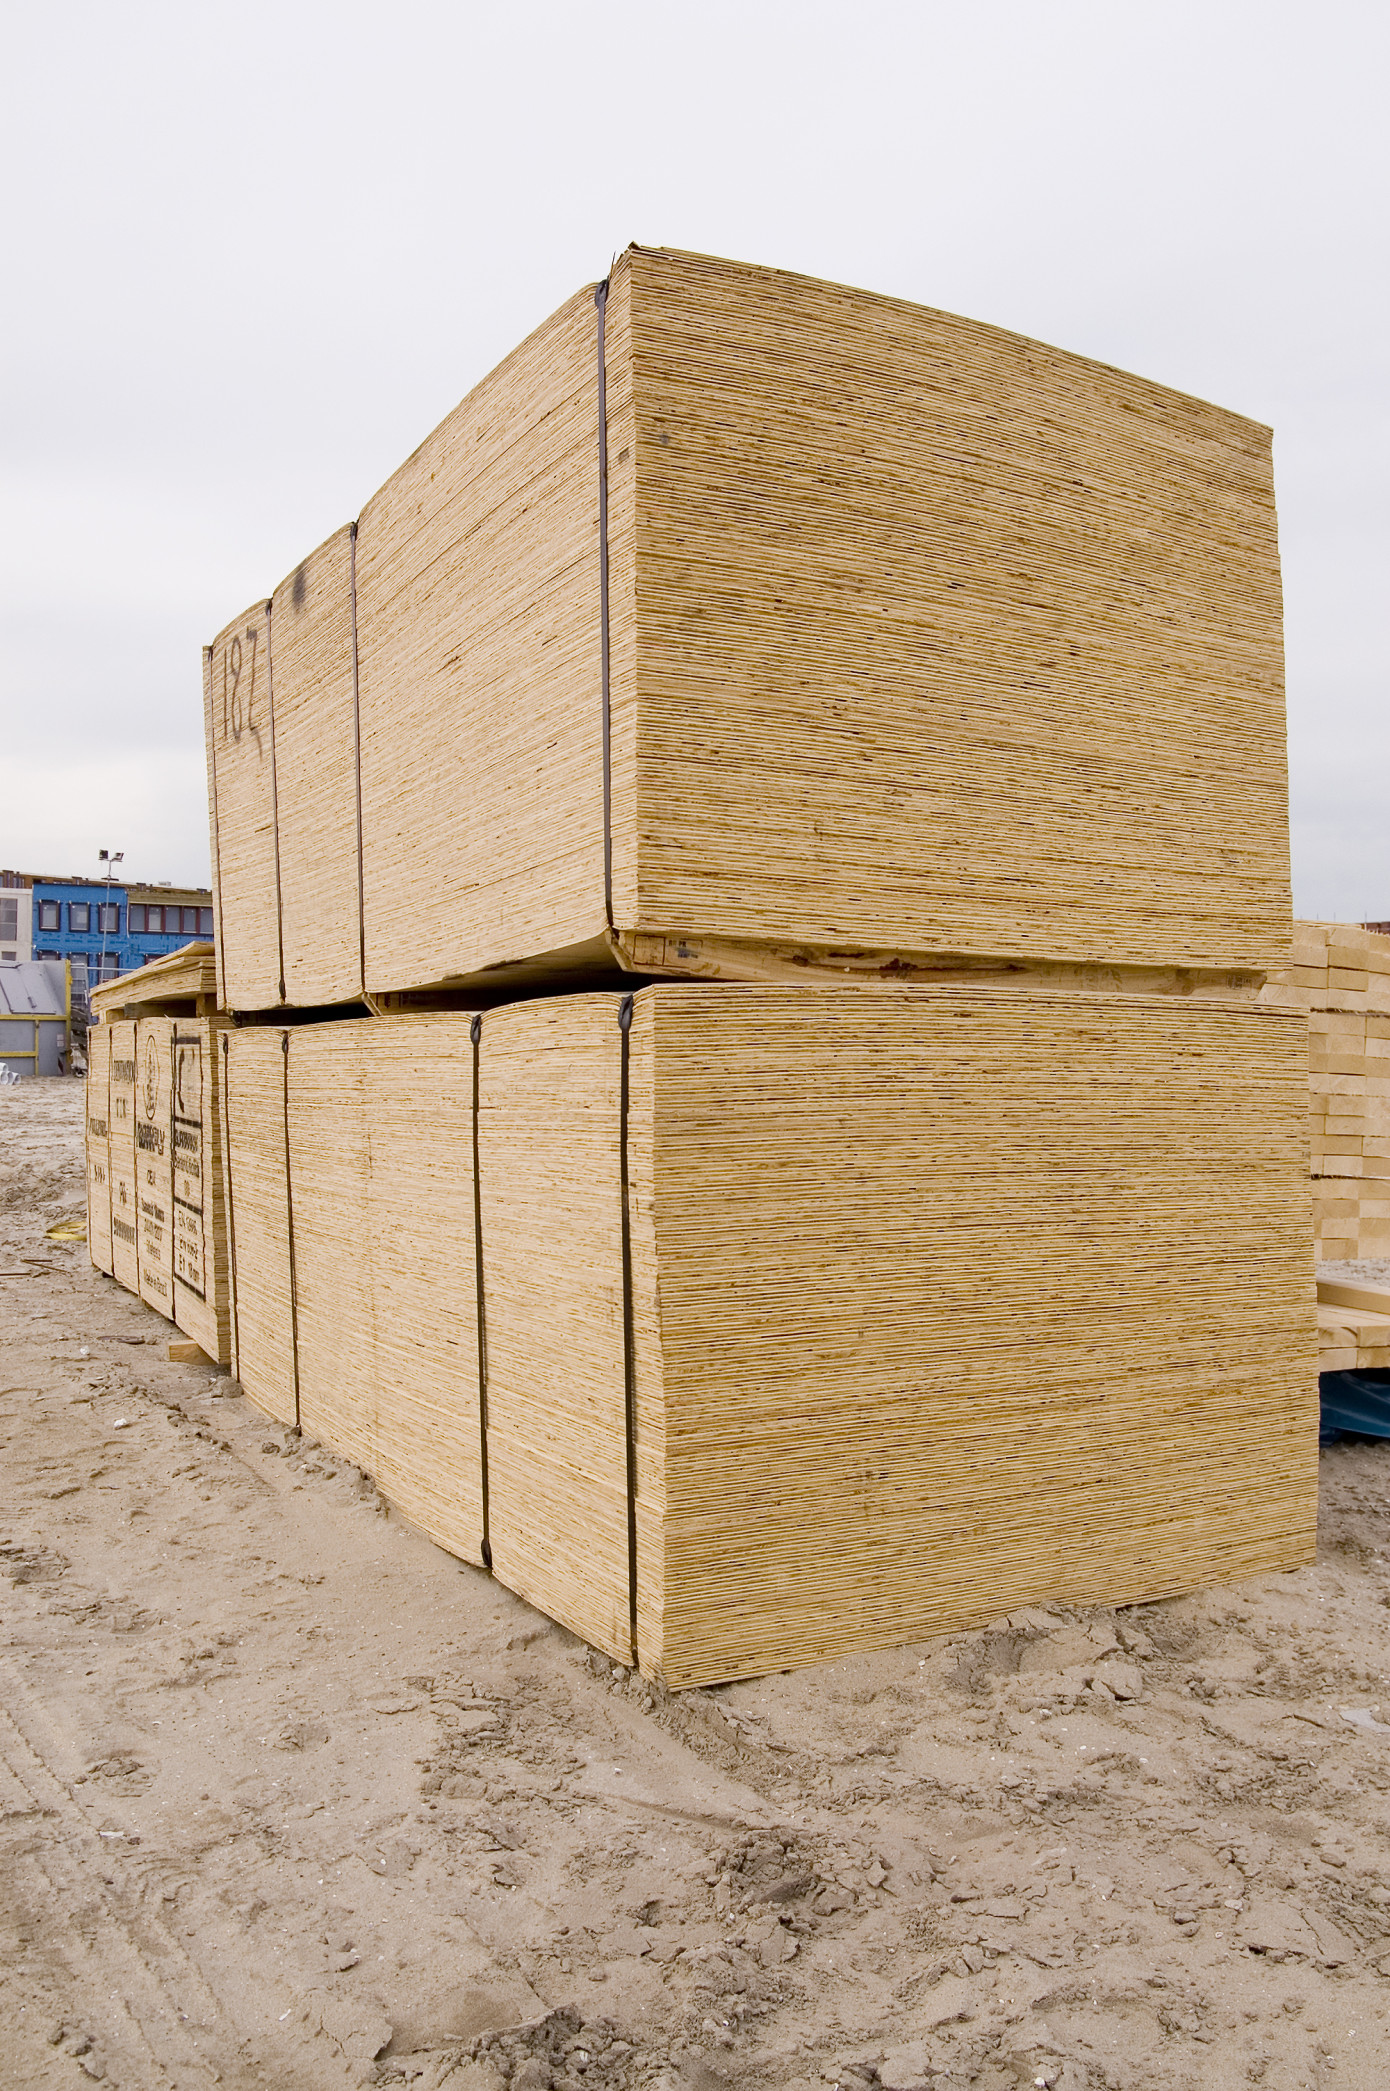 In March, price for plywood exported from Brazil up 4%